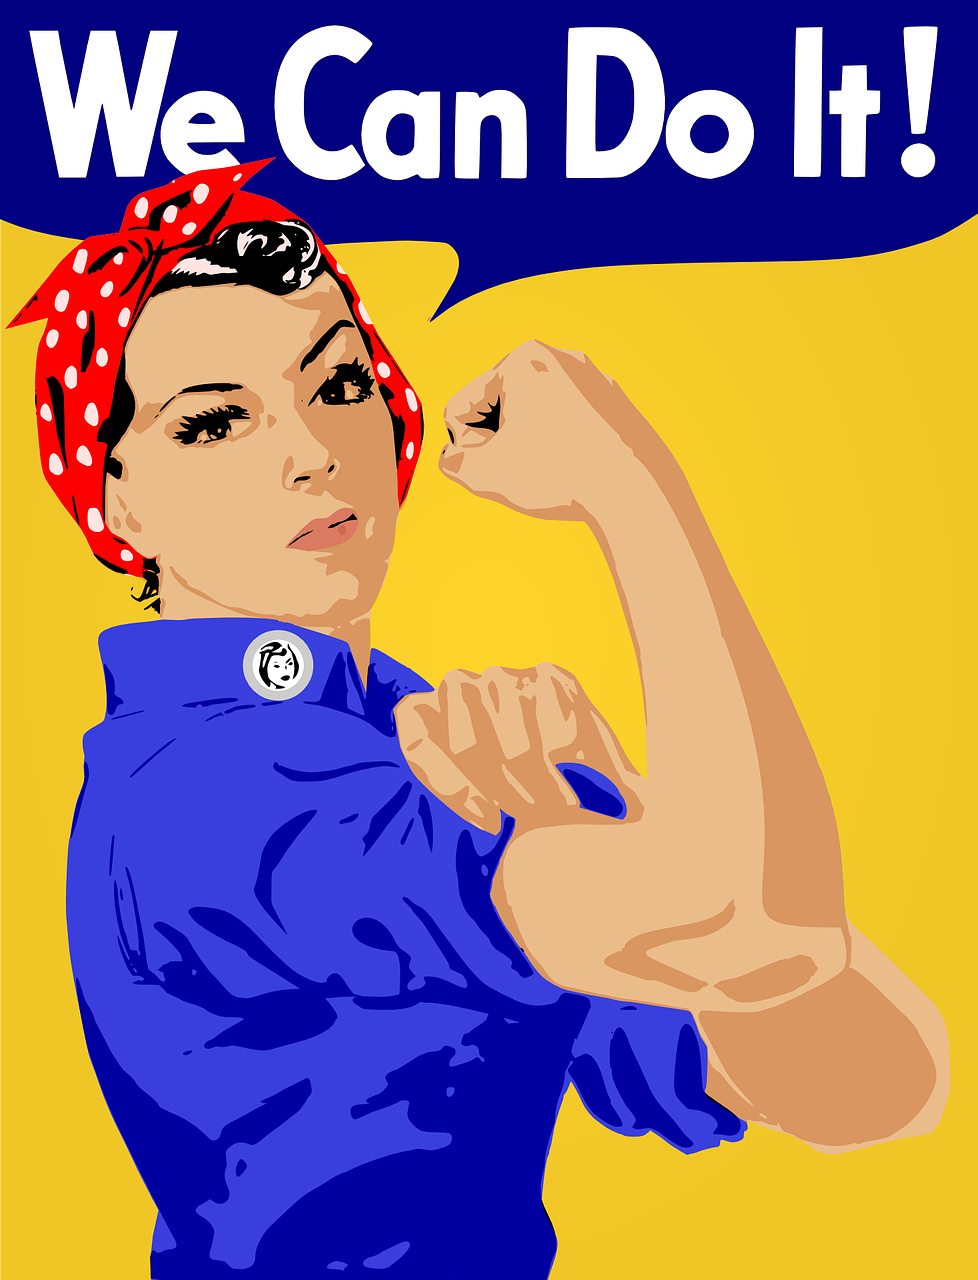 We can do it! Feminismus 